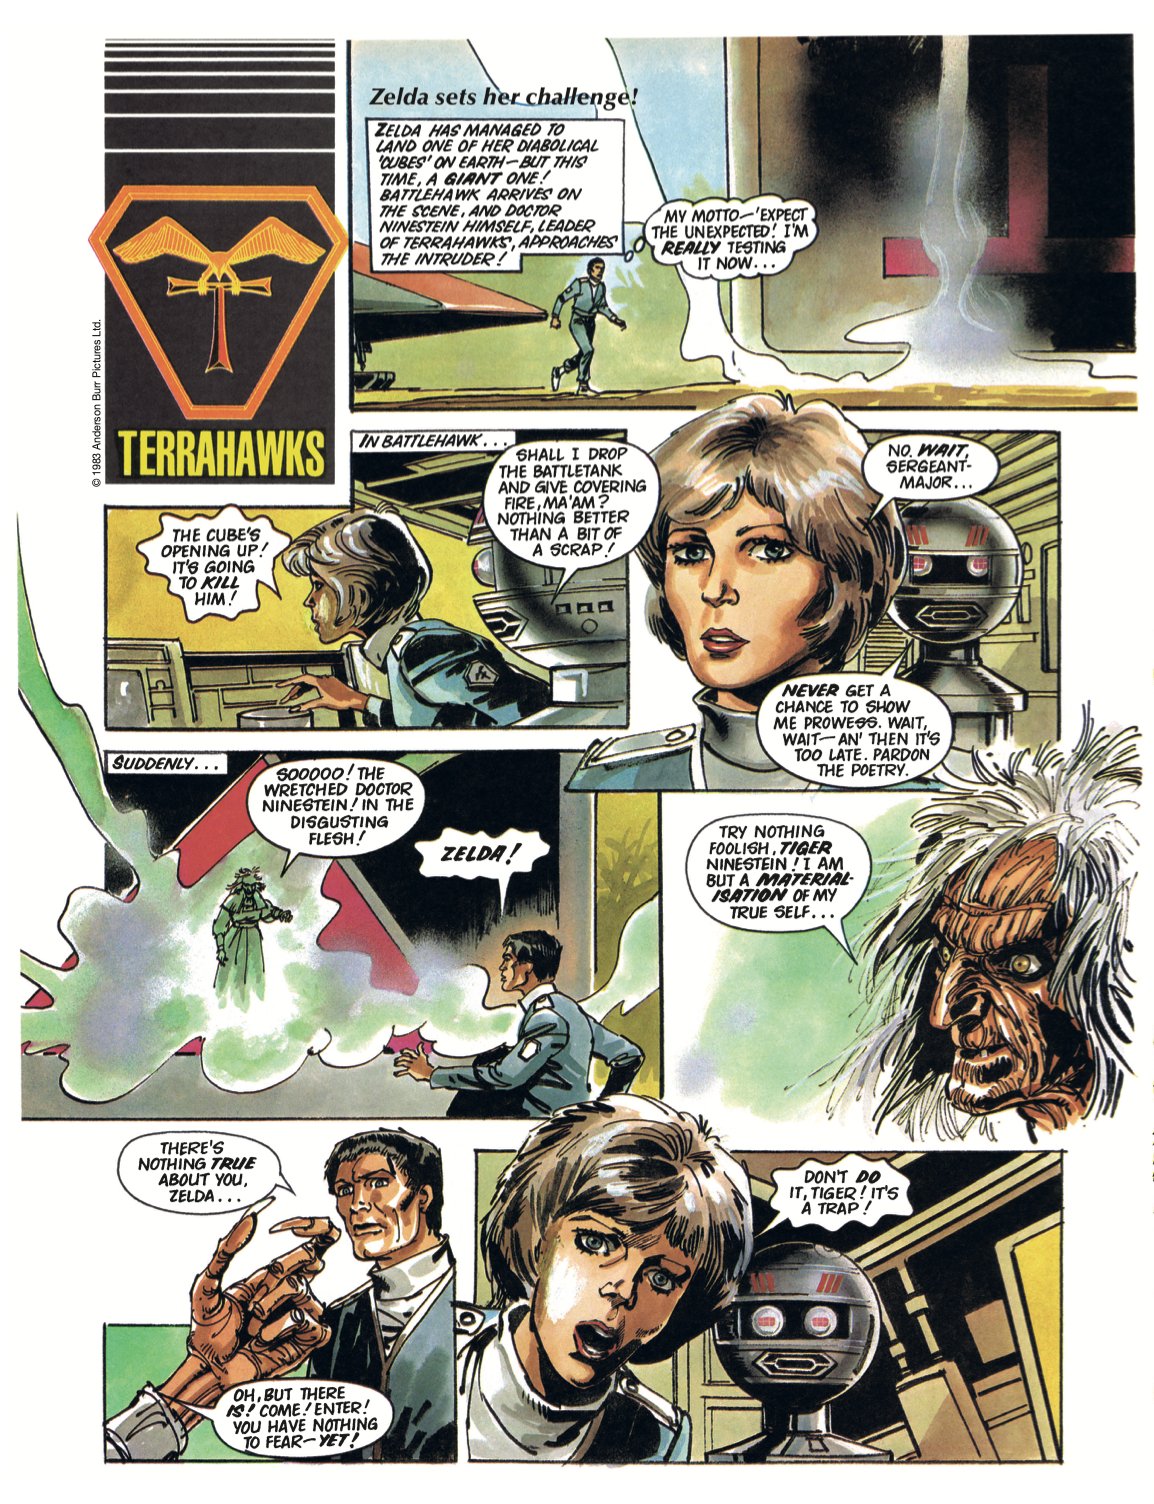 Terrahawks Comic Anthology - The Gerry Anderson Store